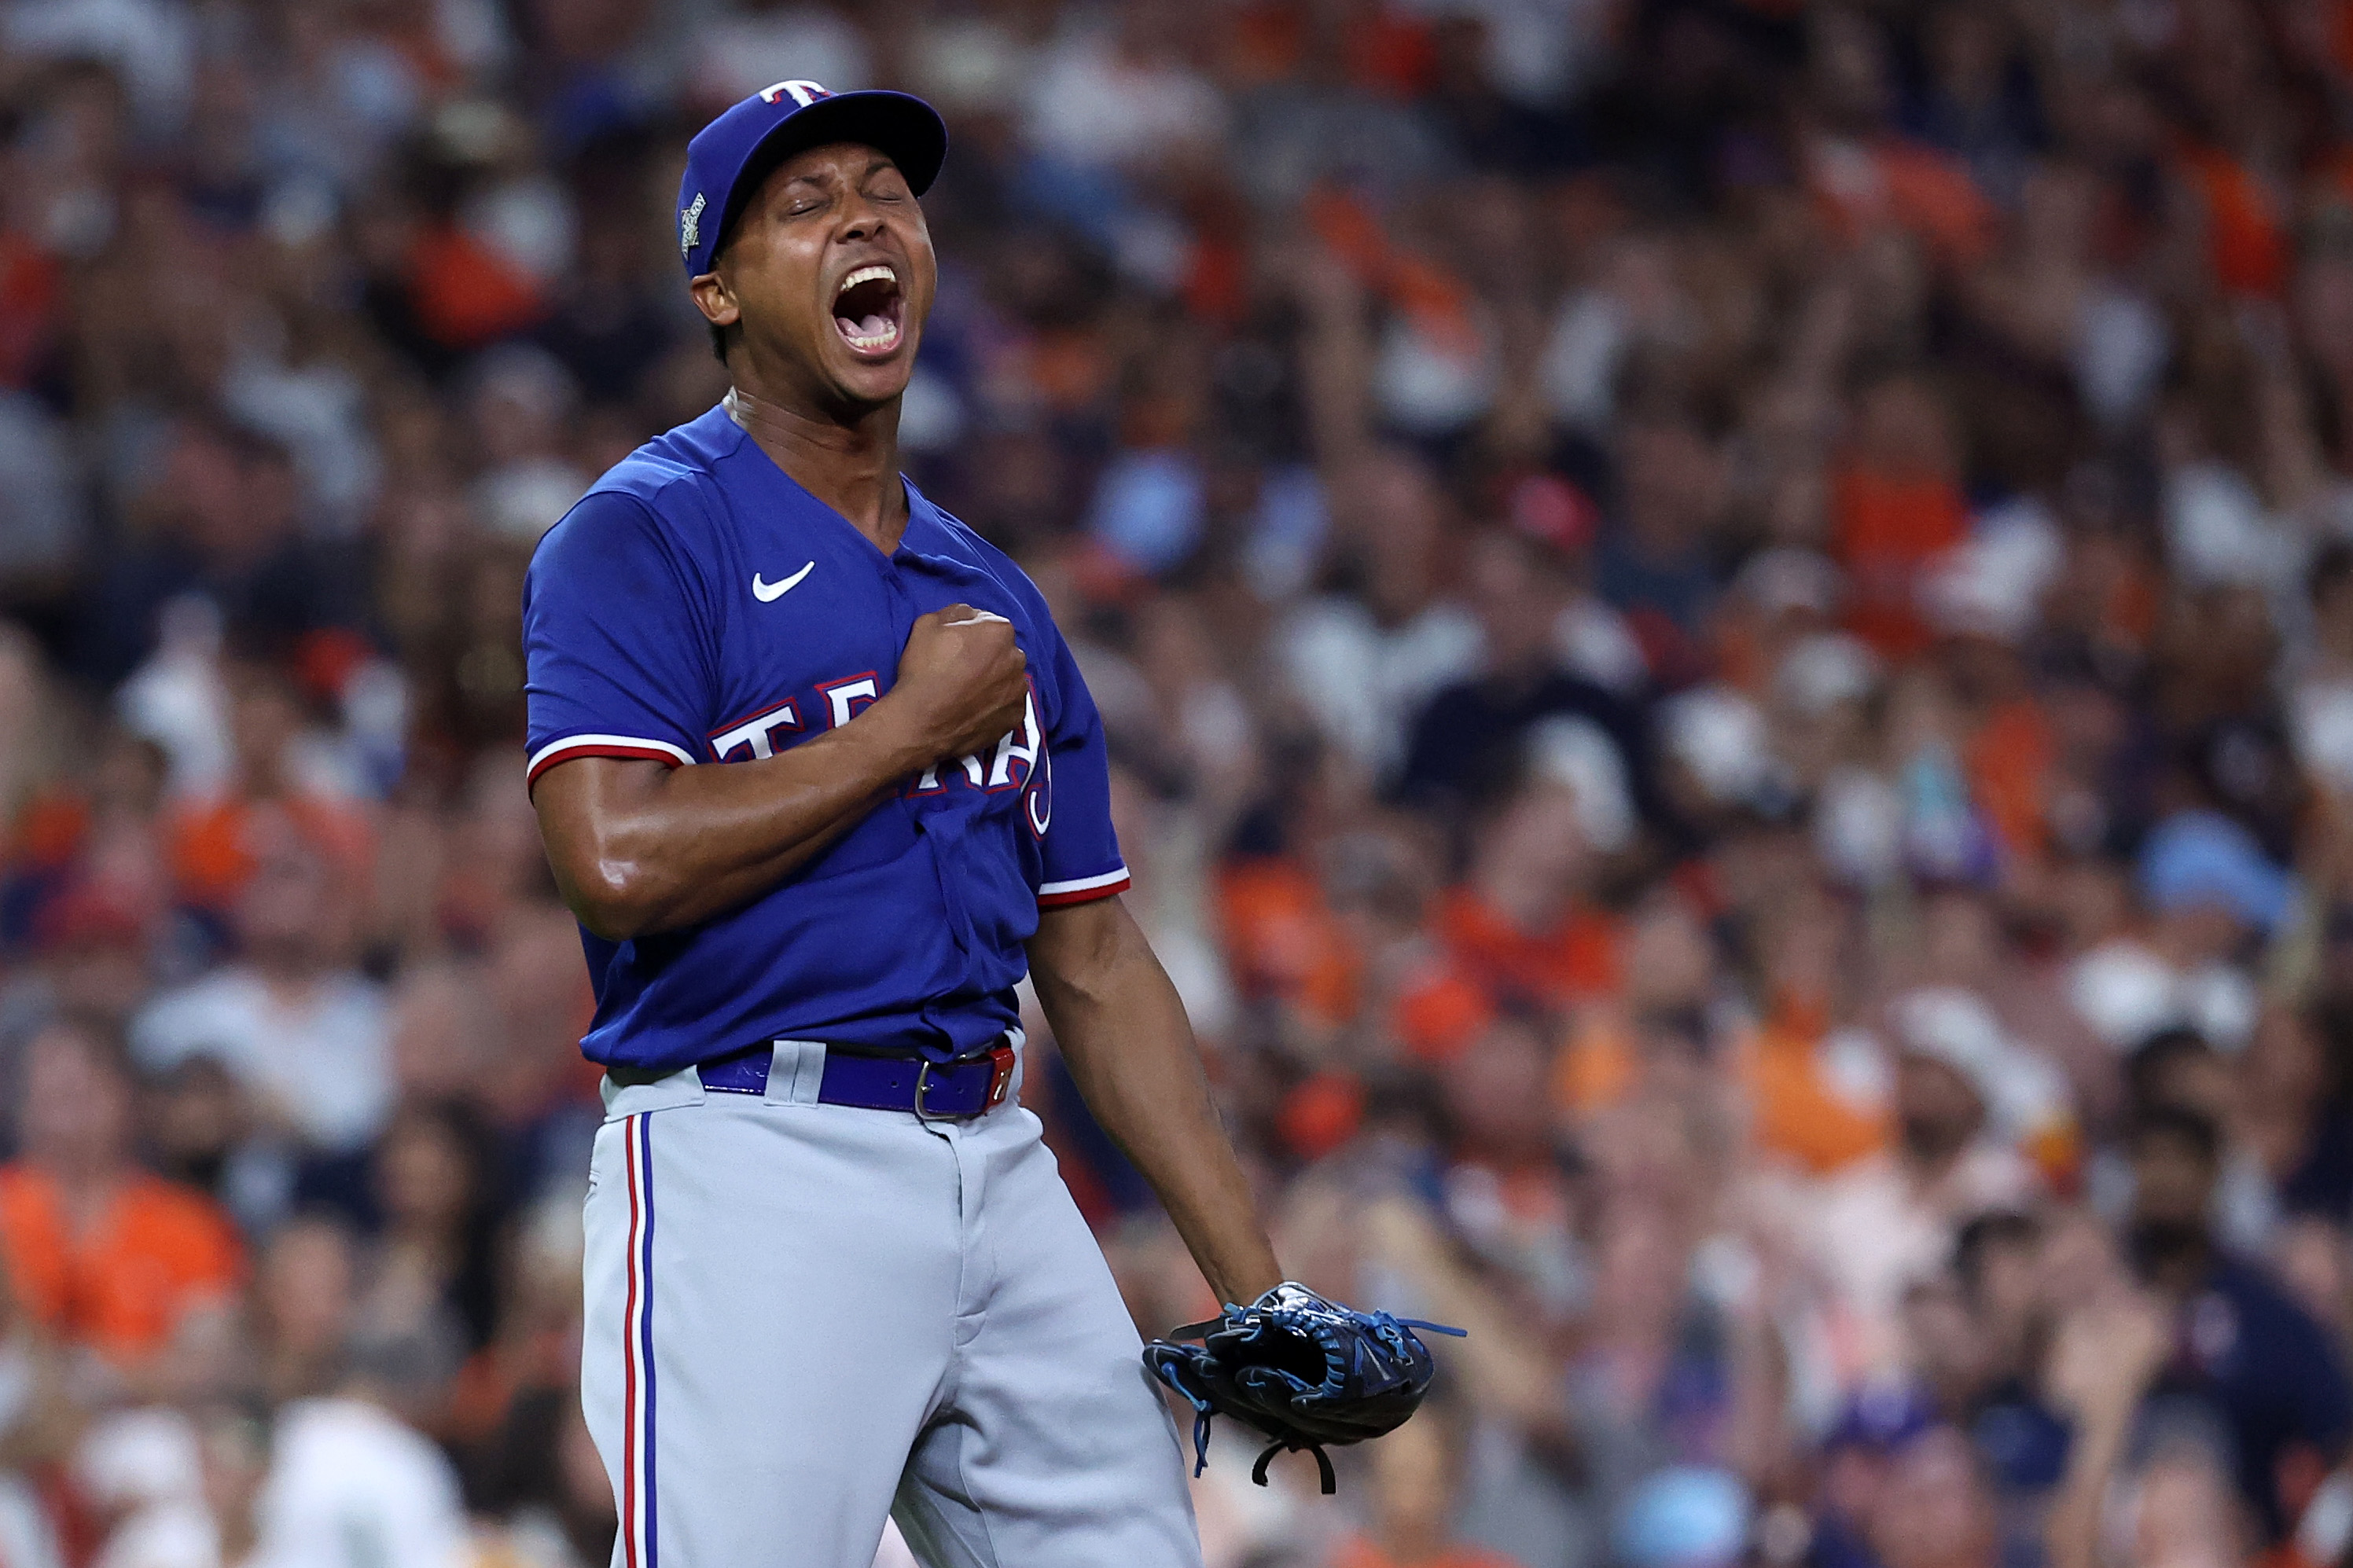 Oct 22, 2023; Houston, Texas, USA; Texas Rangers relief pitcher Jose Leclerc (25) reacts after an out against the Houston Astros in the eighth inning during game six of the ALCS for the 2023 MLB playoffs at Minute Maid Park. Mandatory Credit: Troy Taormina-USA TODAY Sports